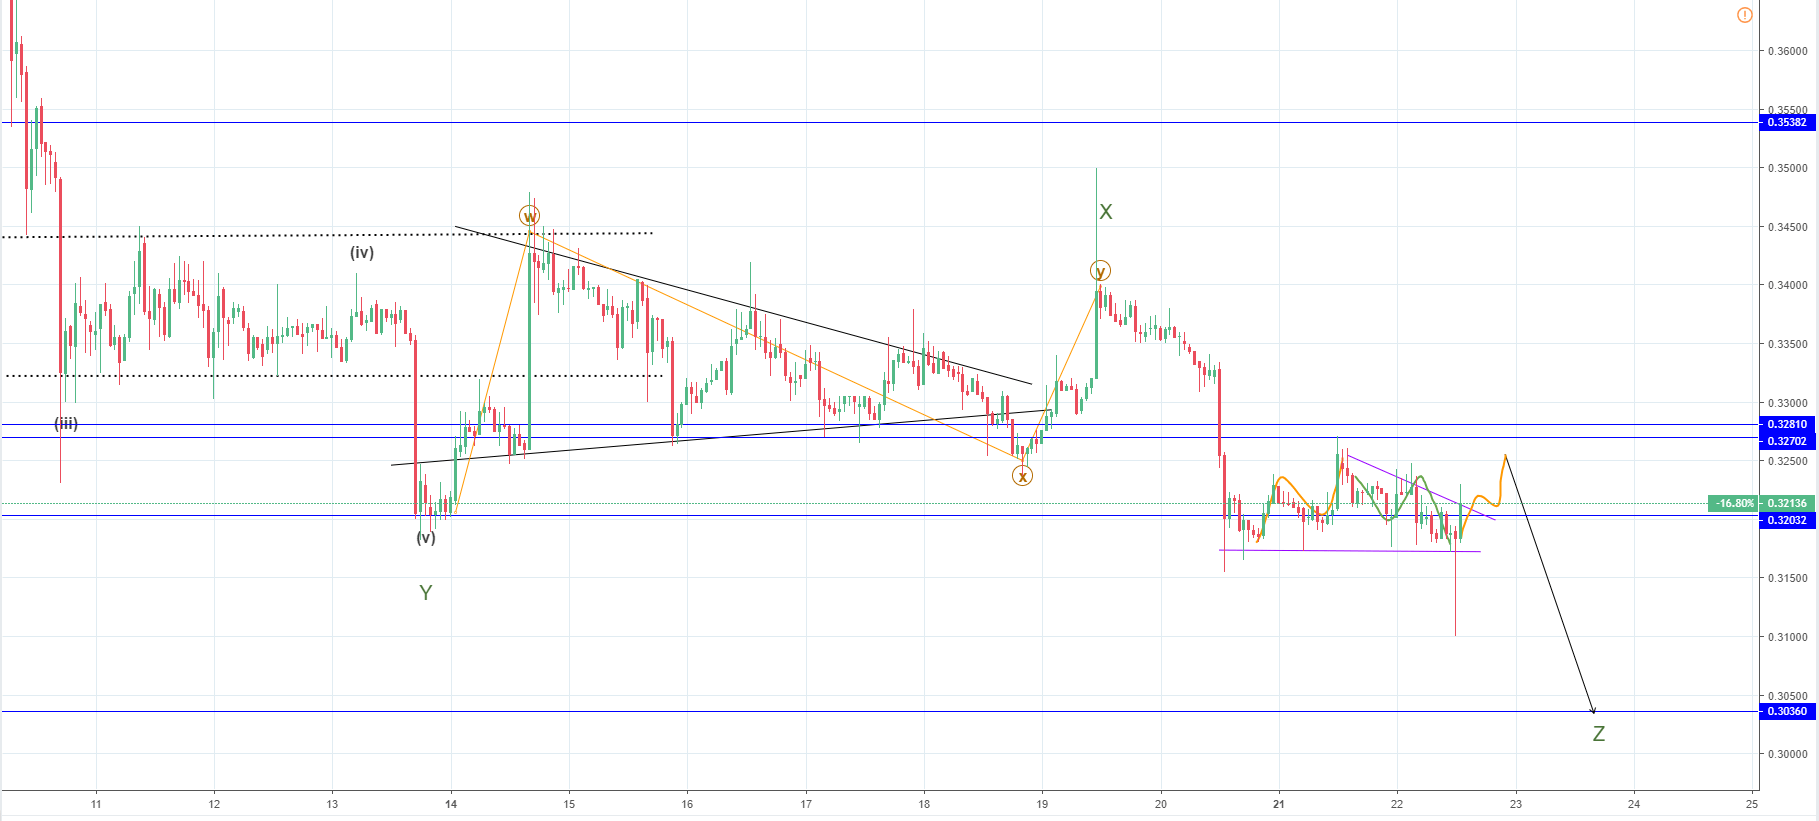 BTC/USD and XRP/USD stuck in a range but more downside expected